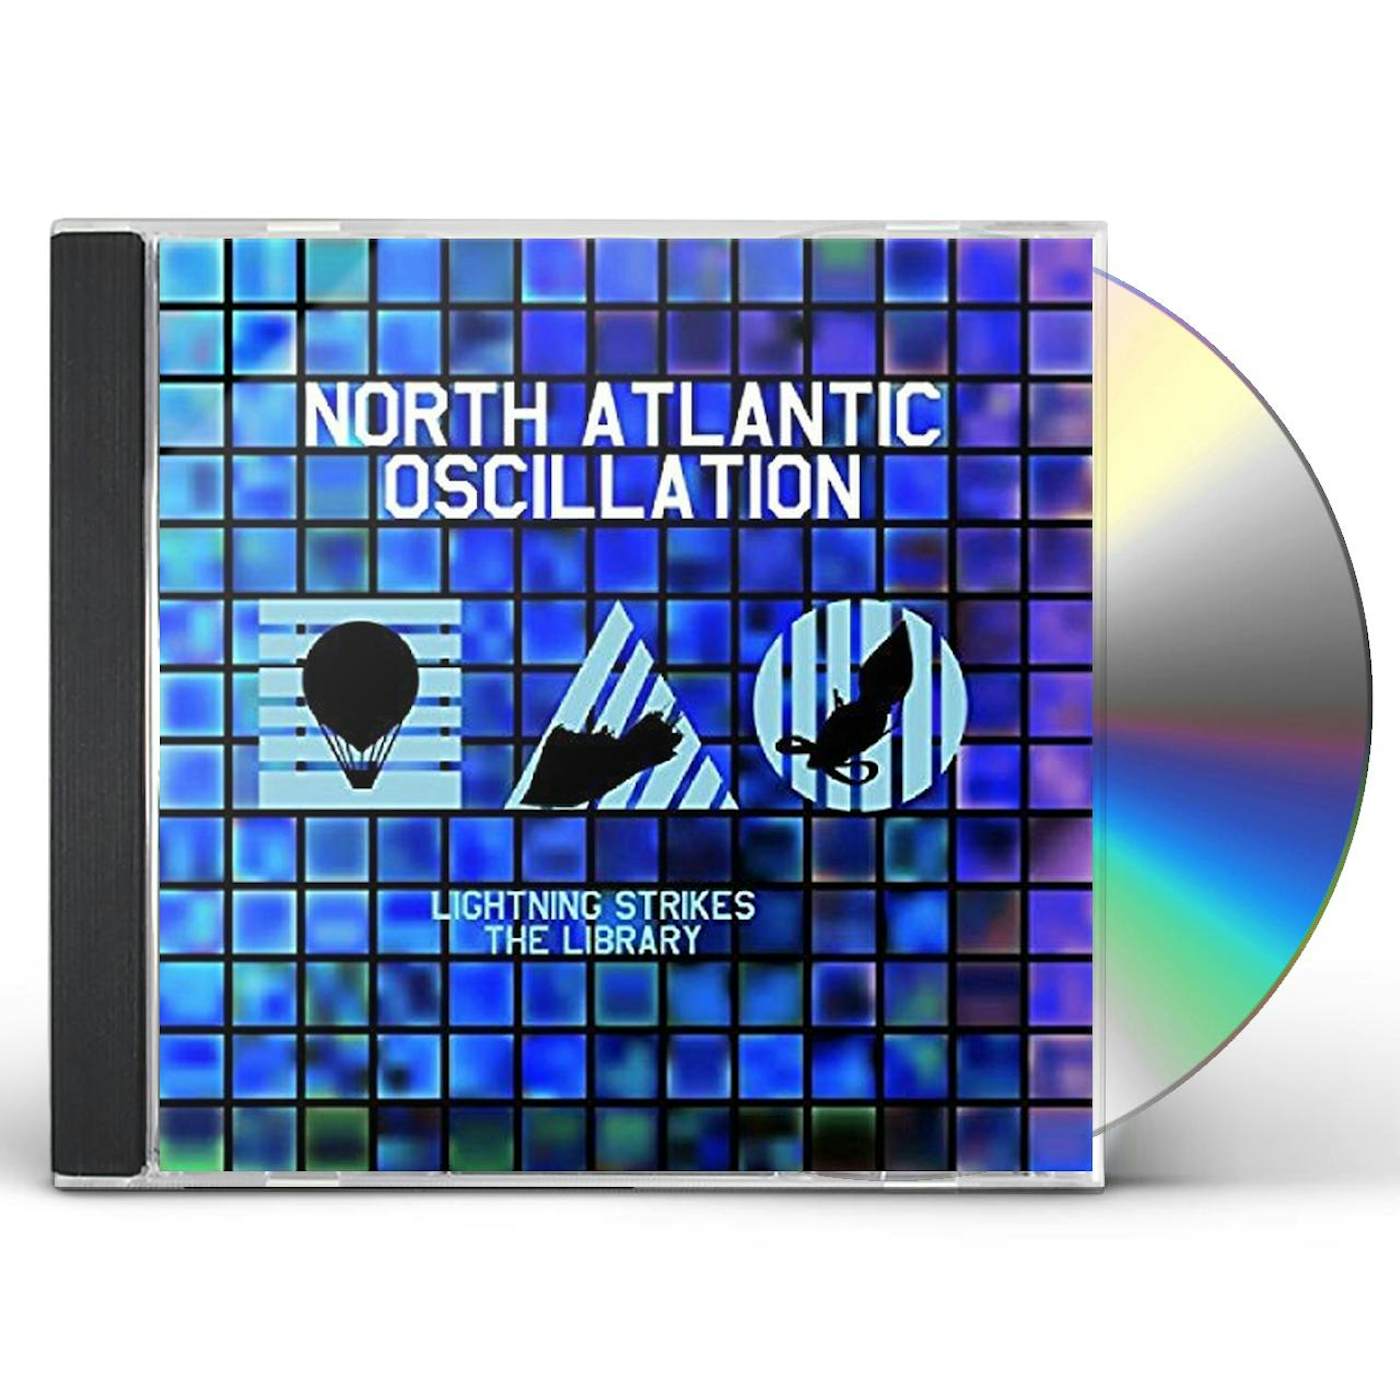 North Atlantic Oscillation LIGHTNING STRIKES THE LIBRARY - A COLLECTION CD